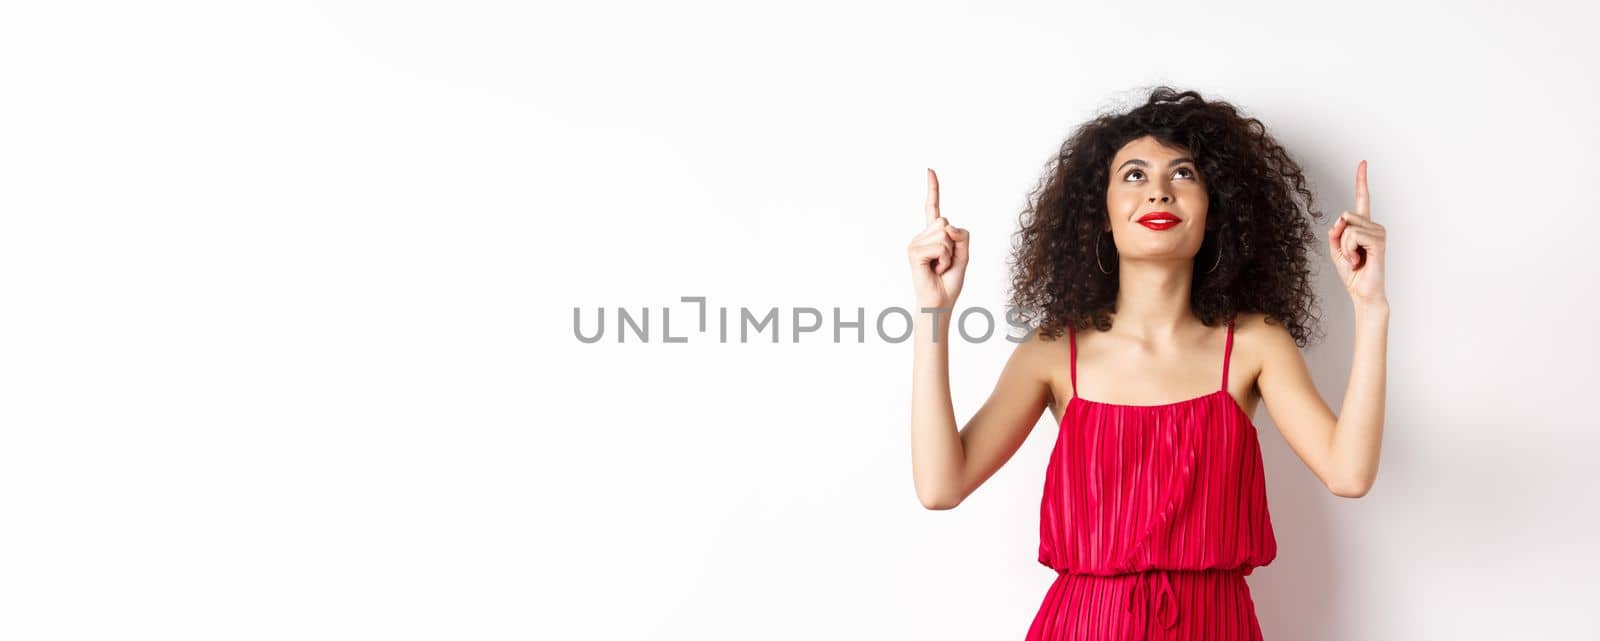 Dreamy young woman in trendy red dress, looking up and pointing at logo, smiling happy, standing over white background. Copy space